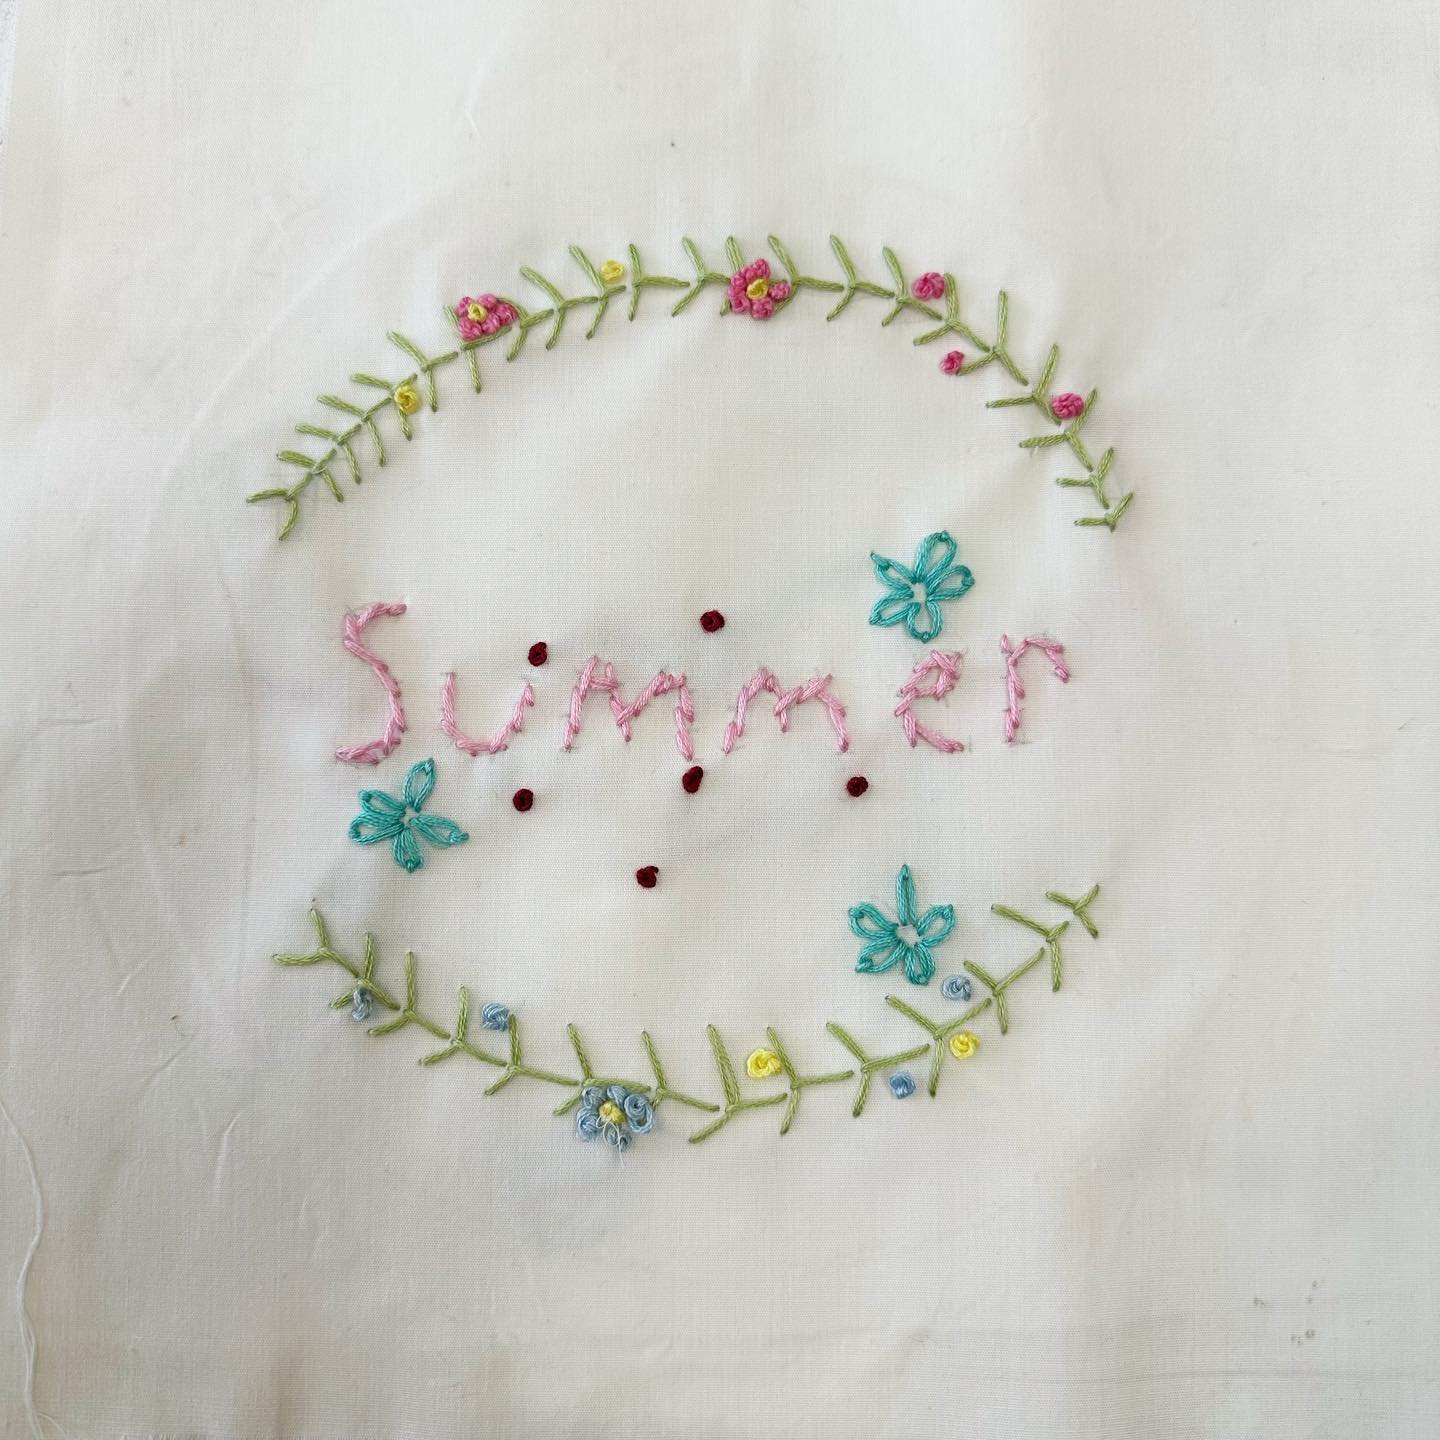 Intro to Embroidery students got creative making their own design with all the stitches they learned plus some new ones! 
Visit campfashionista.net for more Information on embroidery classes!

#embroidery #embroideryart #embroiderywork #introtoembroi